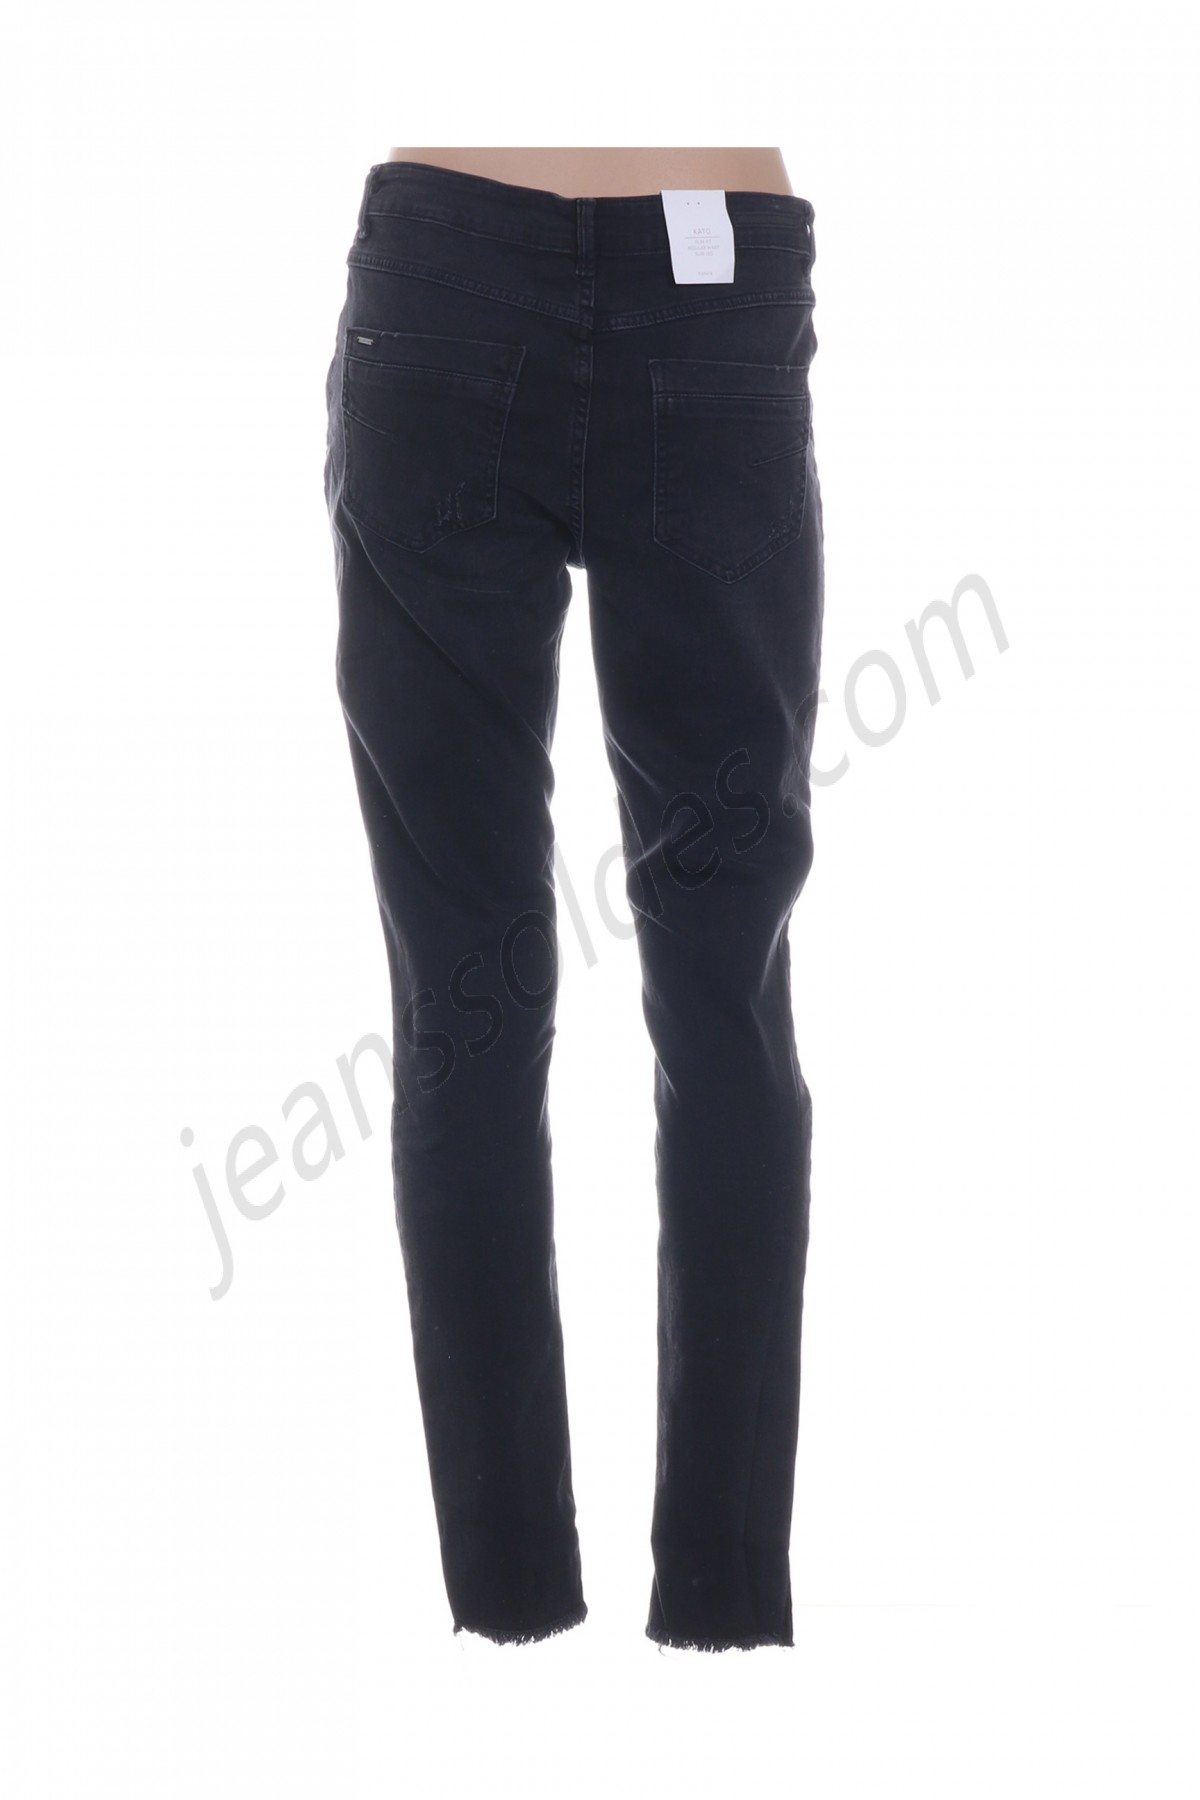 b.young-Jeans coupe slim prix d’amis - -1